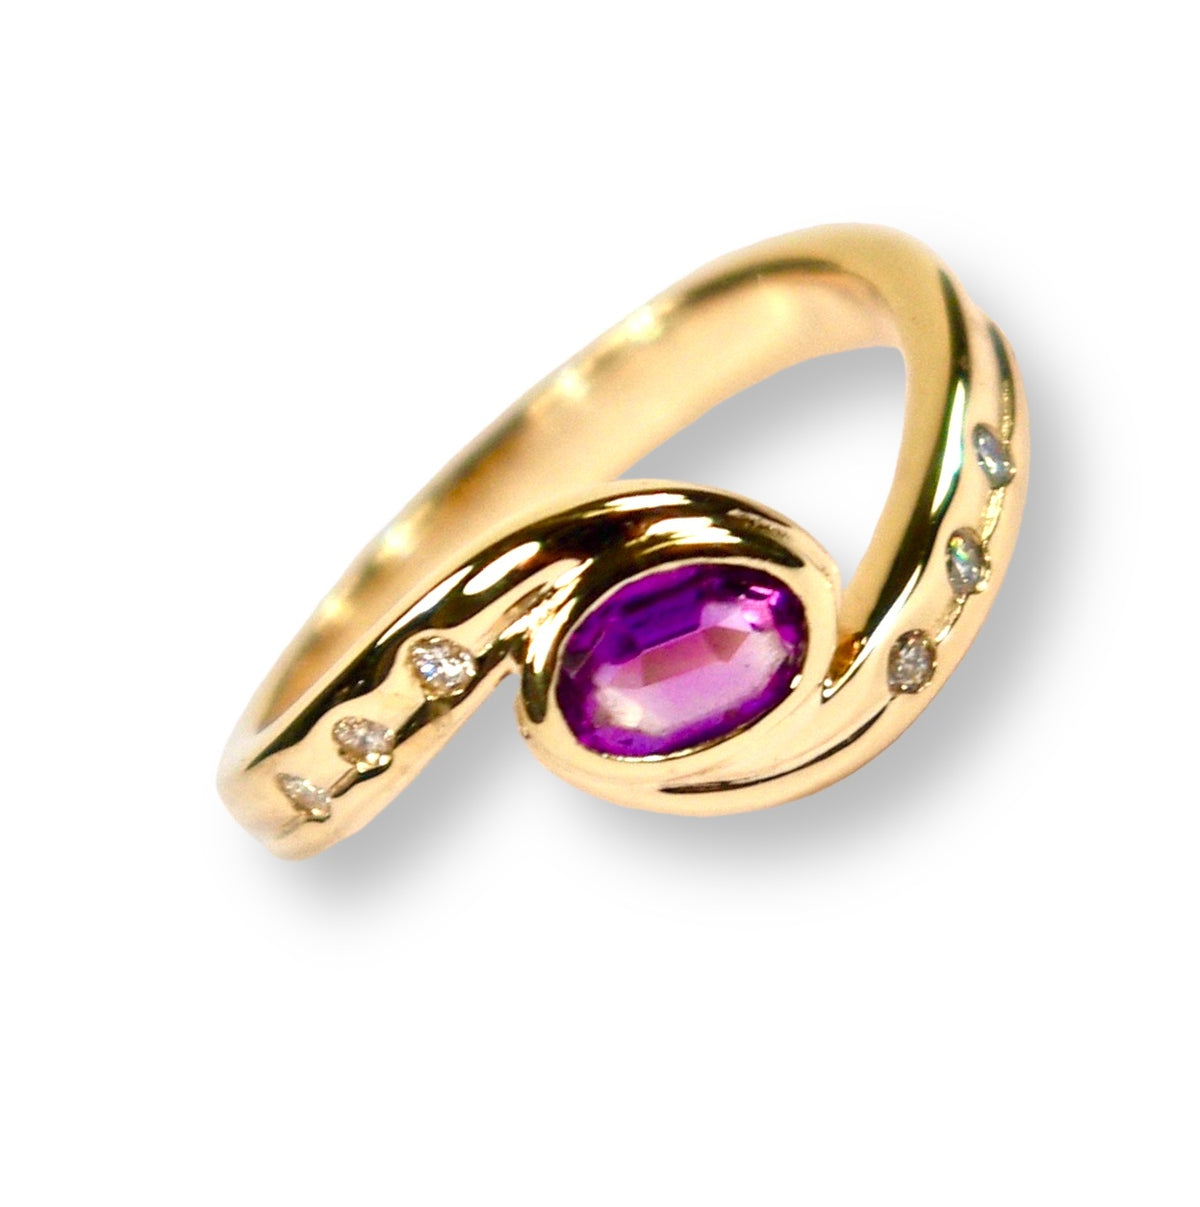 Mavis&#39;s Custom Bespoke Curved Twist Ring | In Remodelled 9ct Yellow Gold | Set With Her Own Amethyst And Diamonds